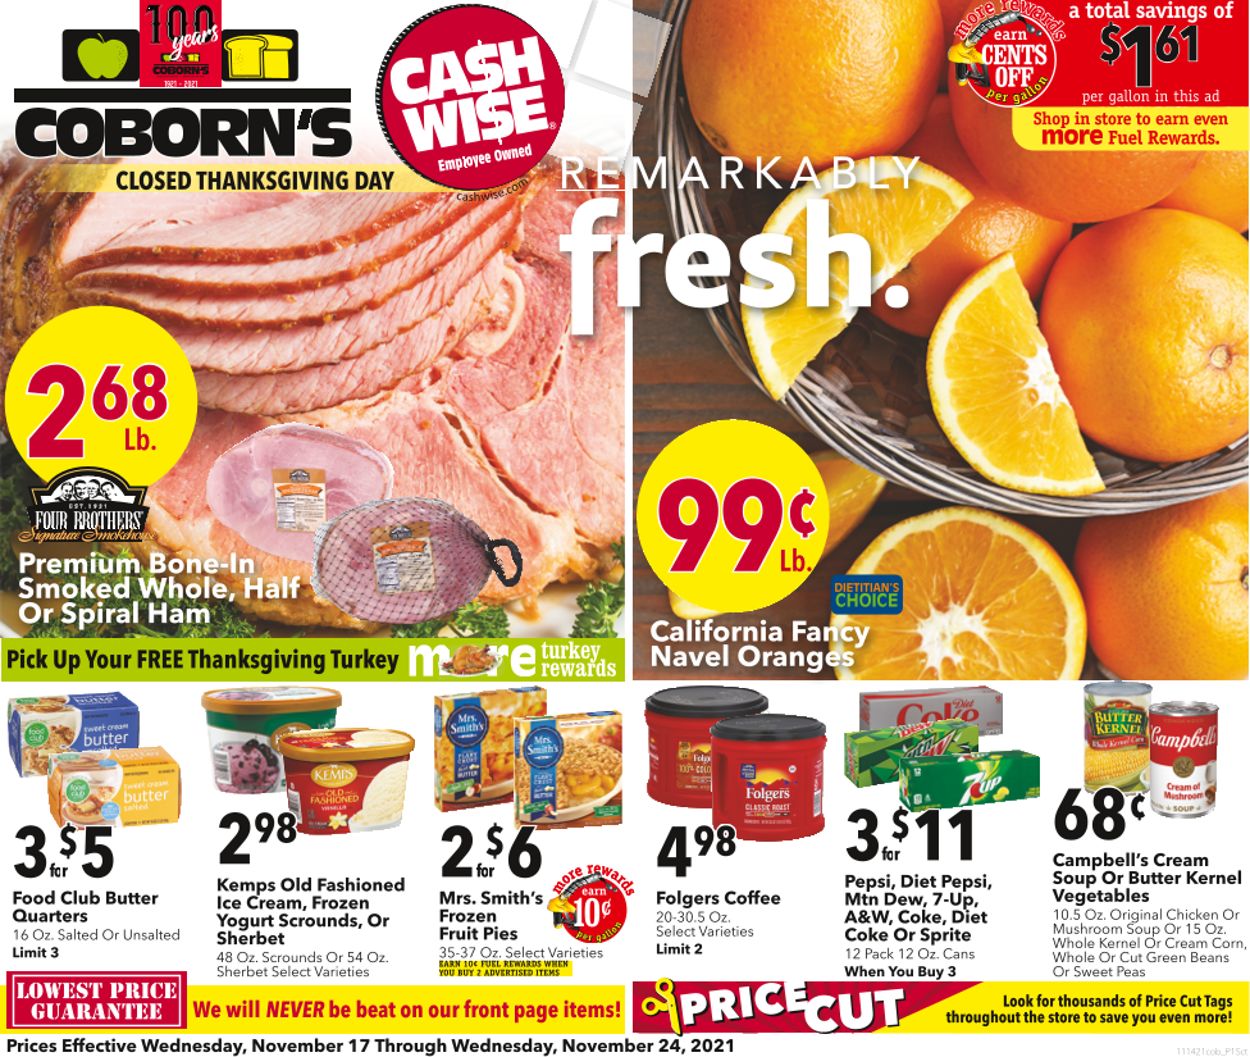 Cash Wise THANSKGIVING 2021 Weekly Ad Circular - valid 11/17-11/24/2021